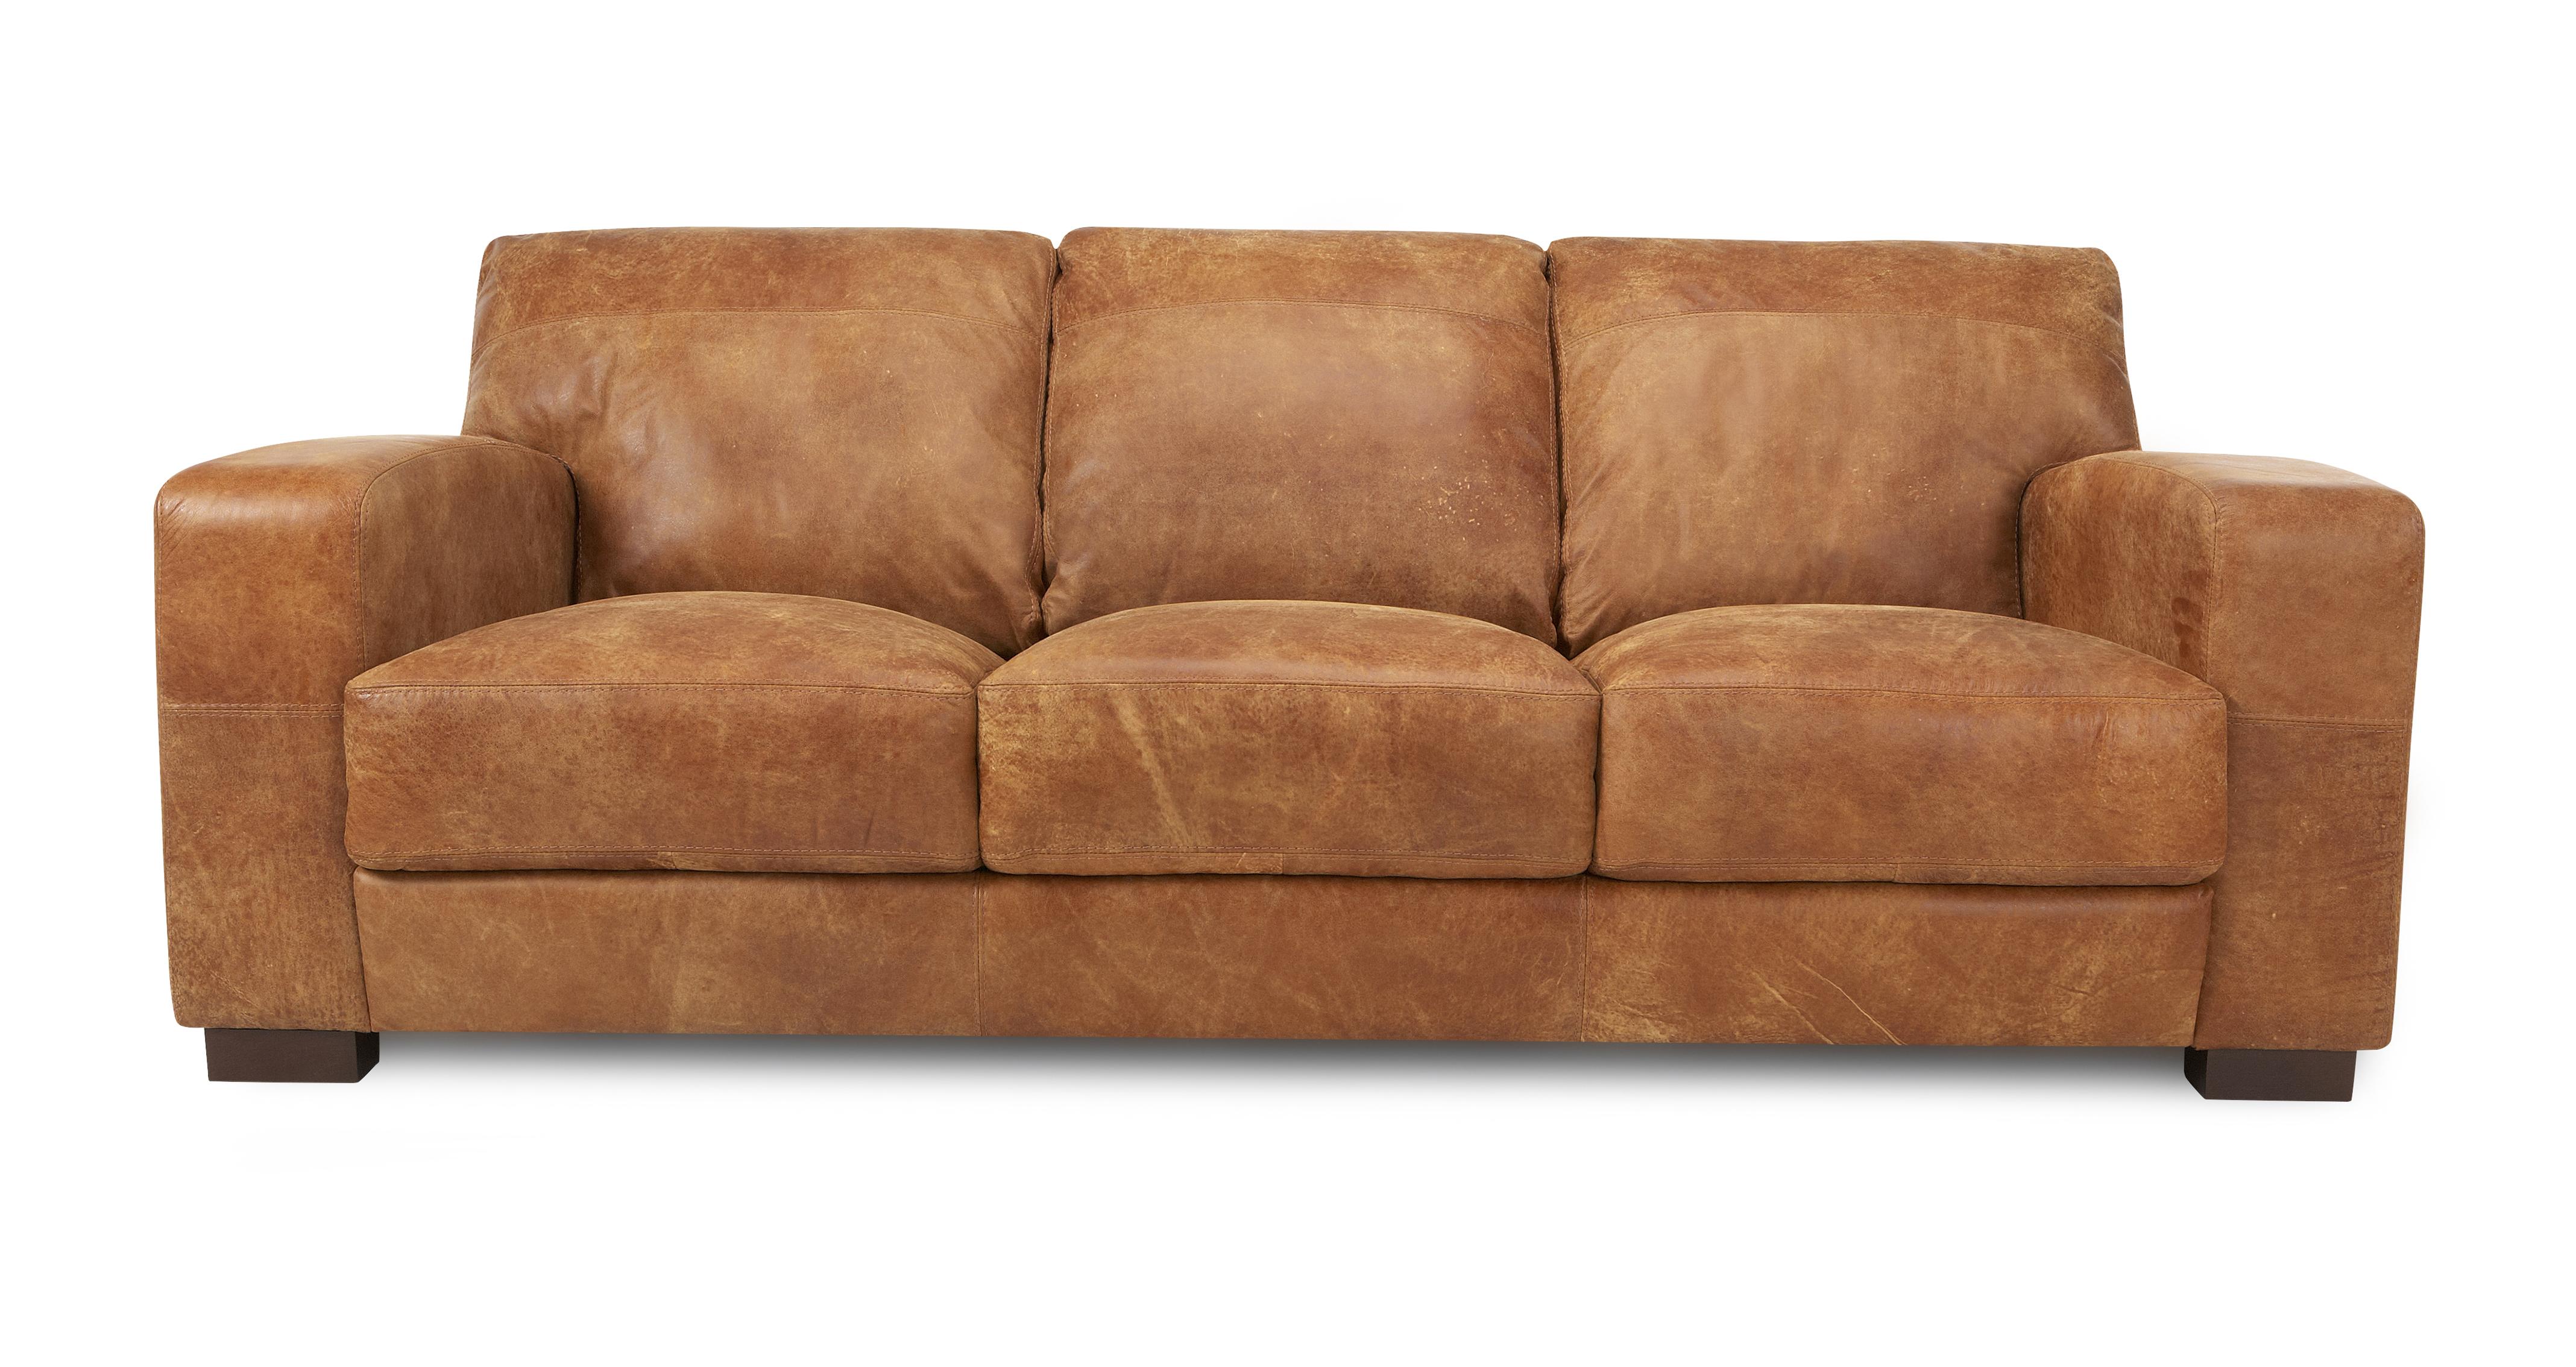 Top 70+ Awe-inspiring natural leather sofa 3 seater You Won't Be Disappointed